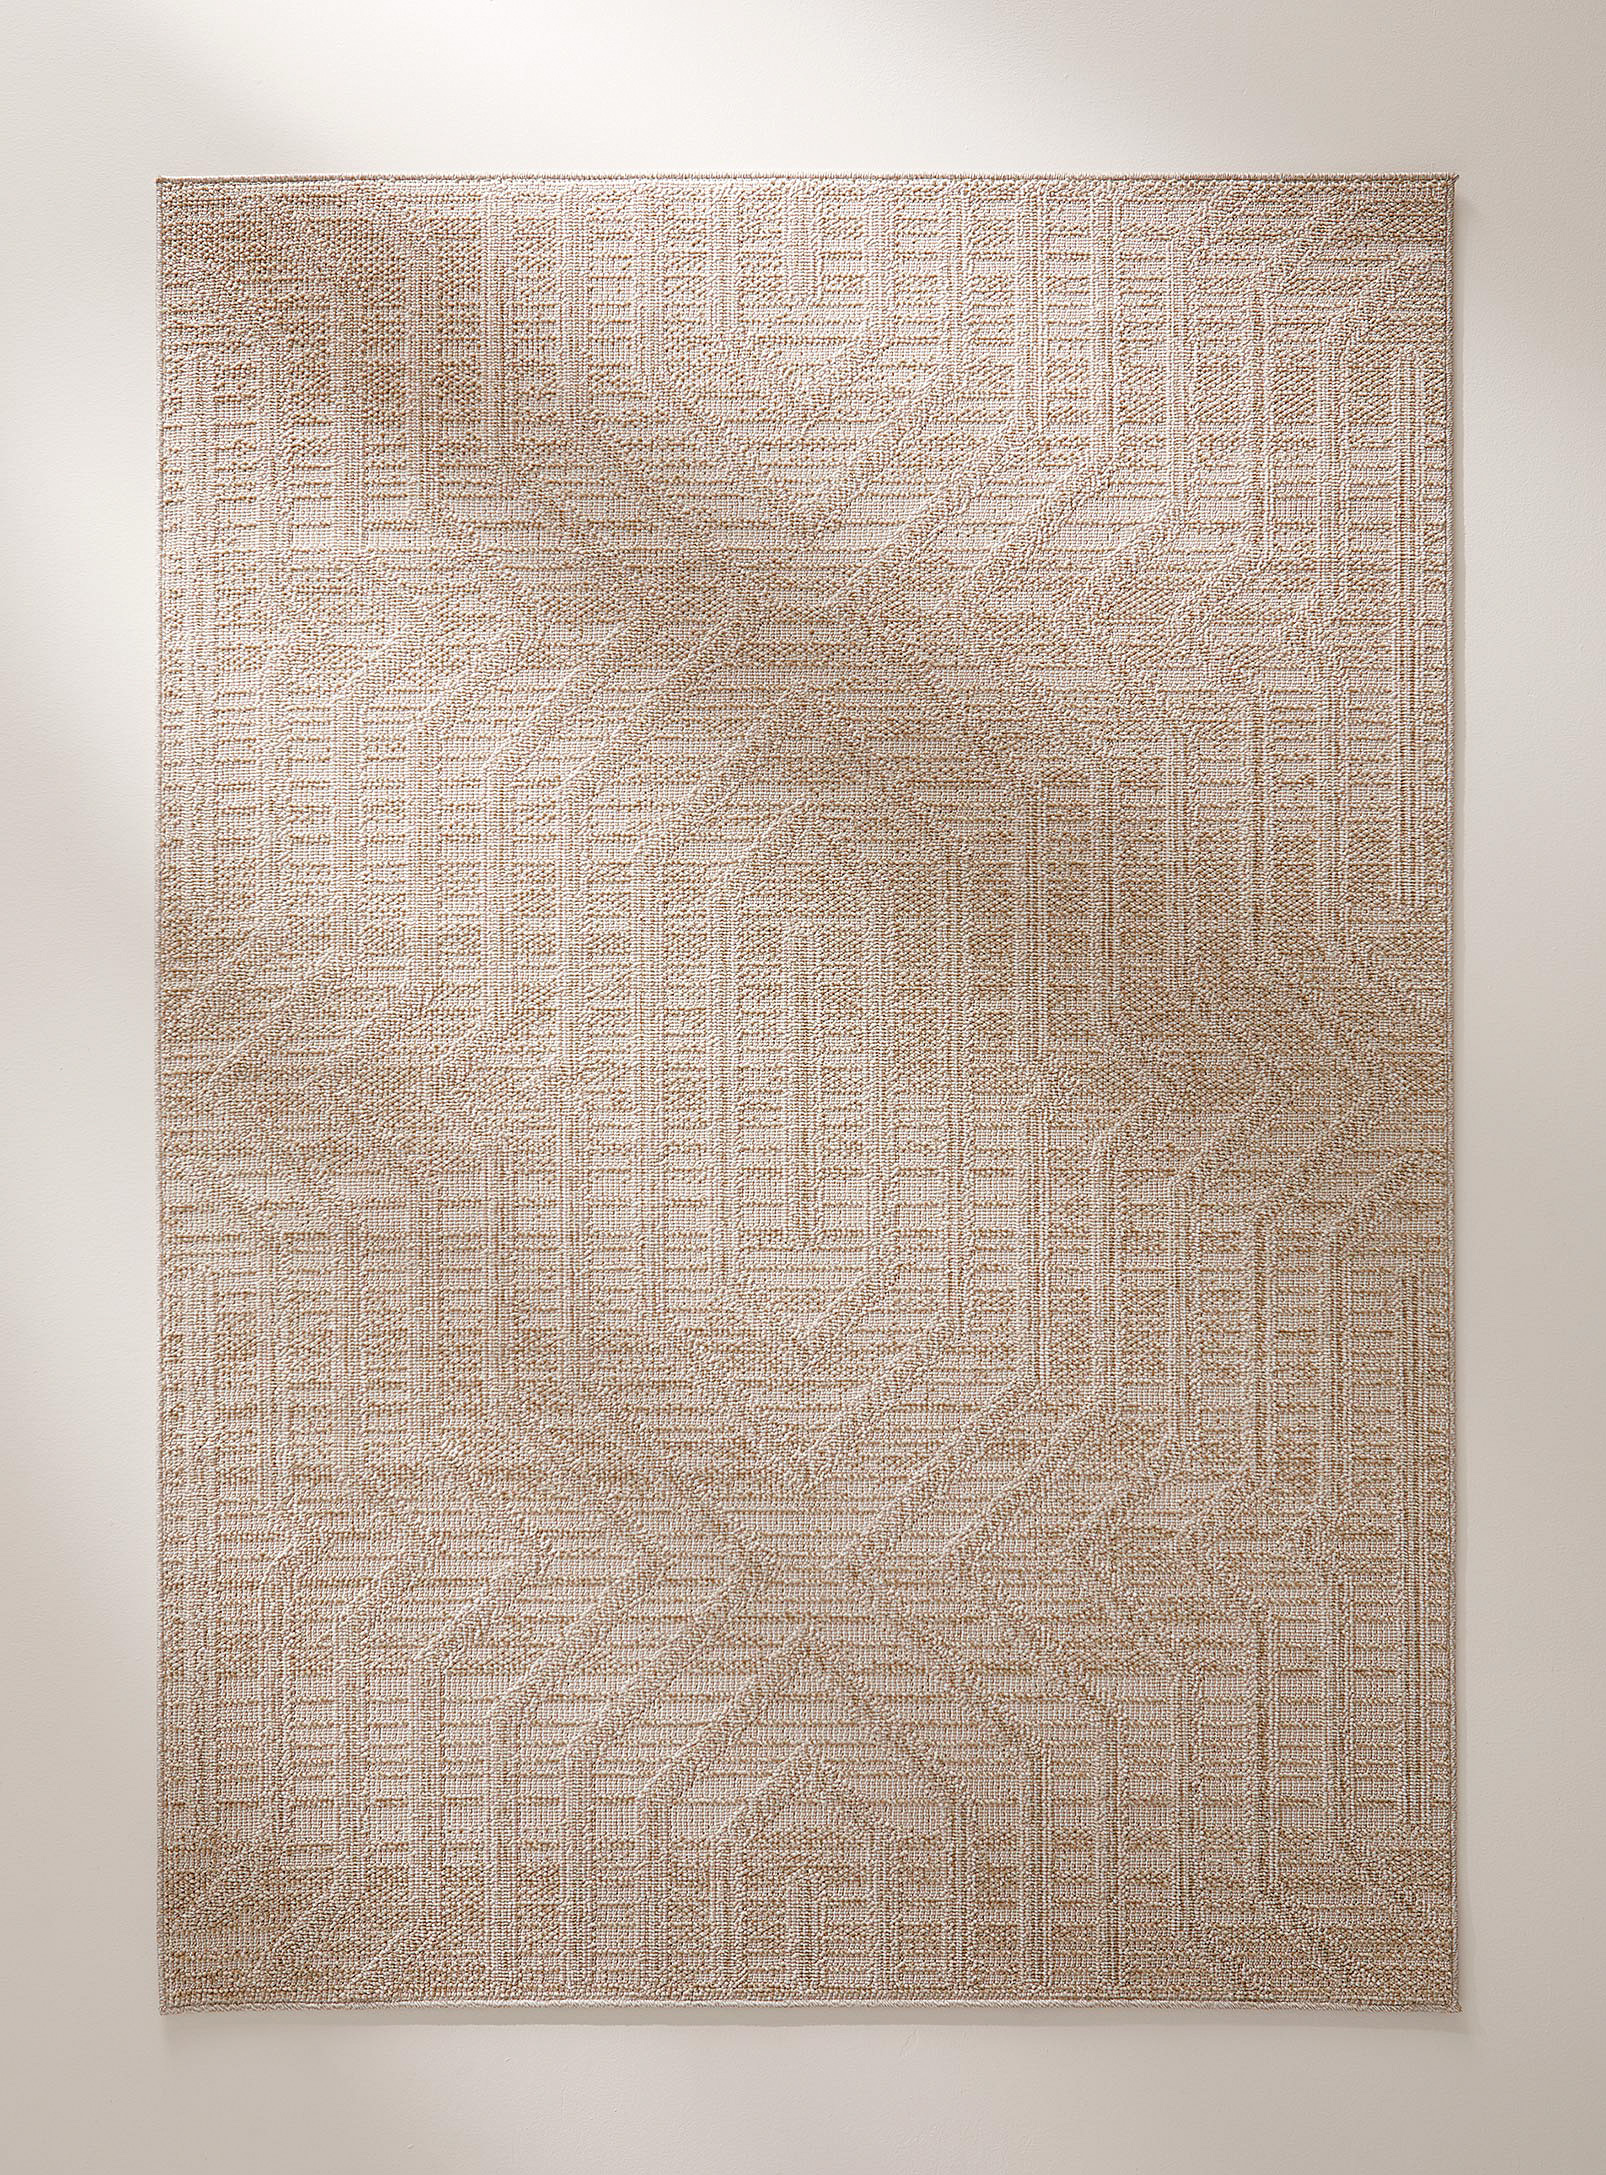 Simons Maison Hypnotic Geometry Rug See Available Sizes In Cream Beige